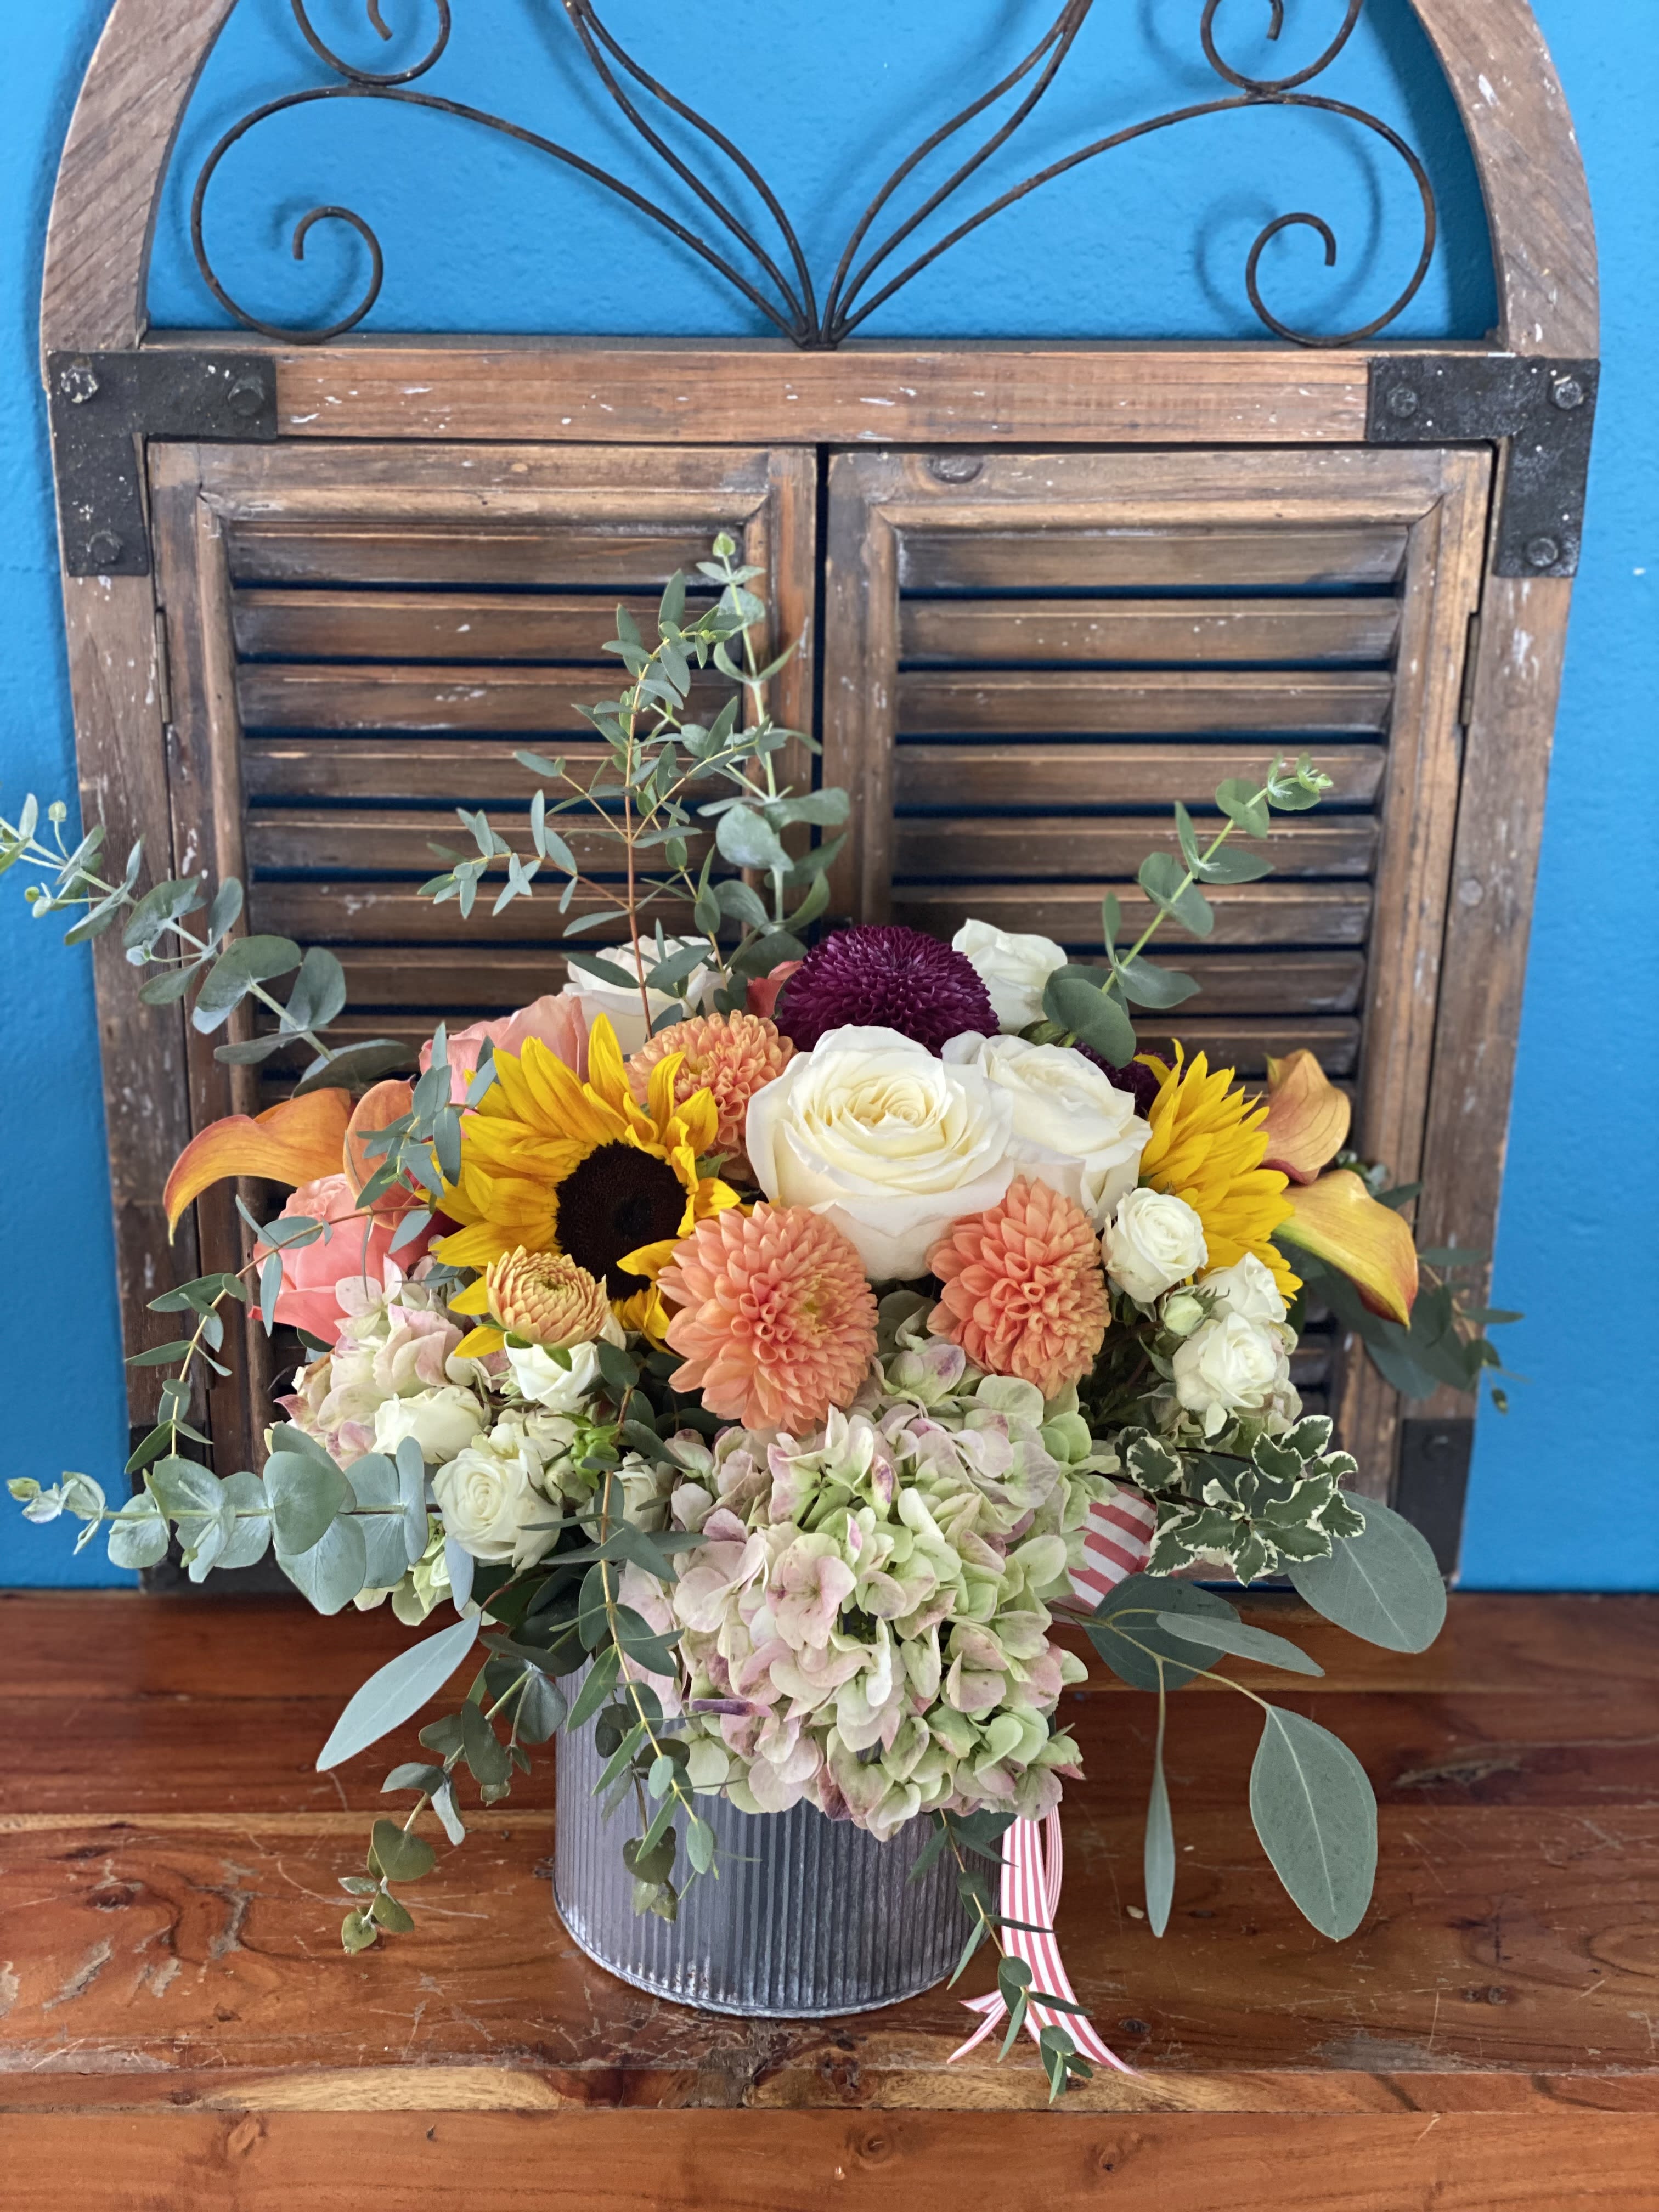 Fall is coming  - Fall bouquet in metalic rustic vase.